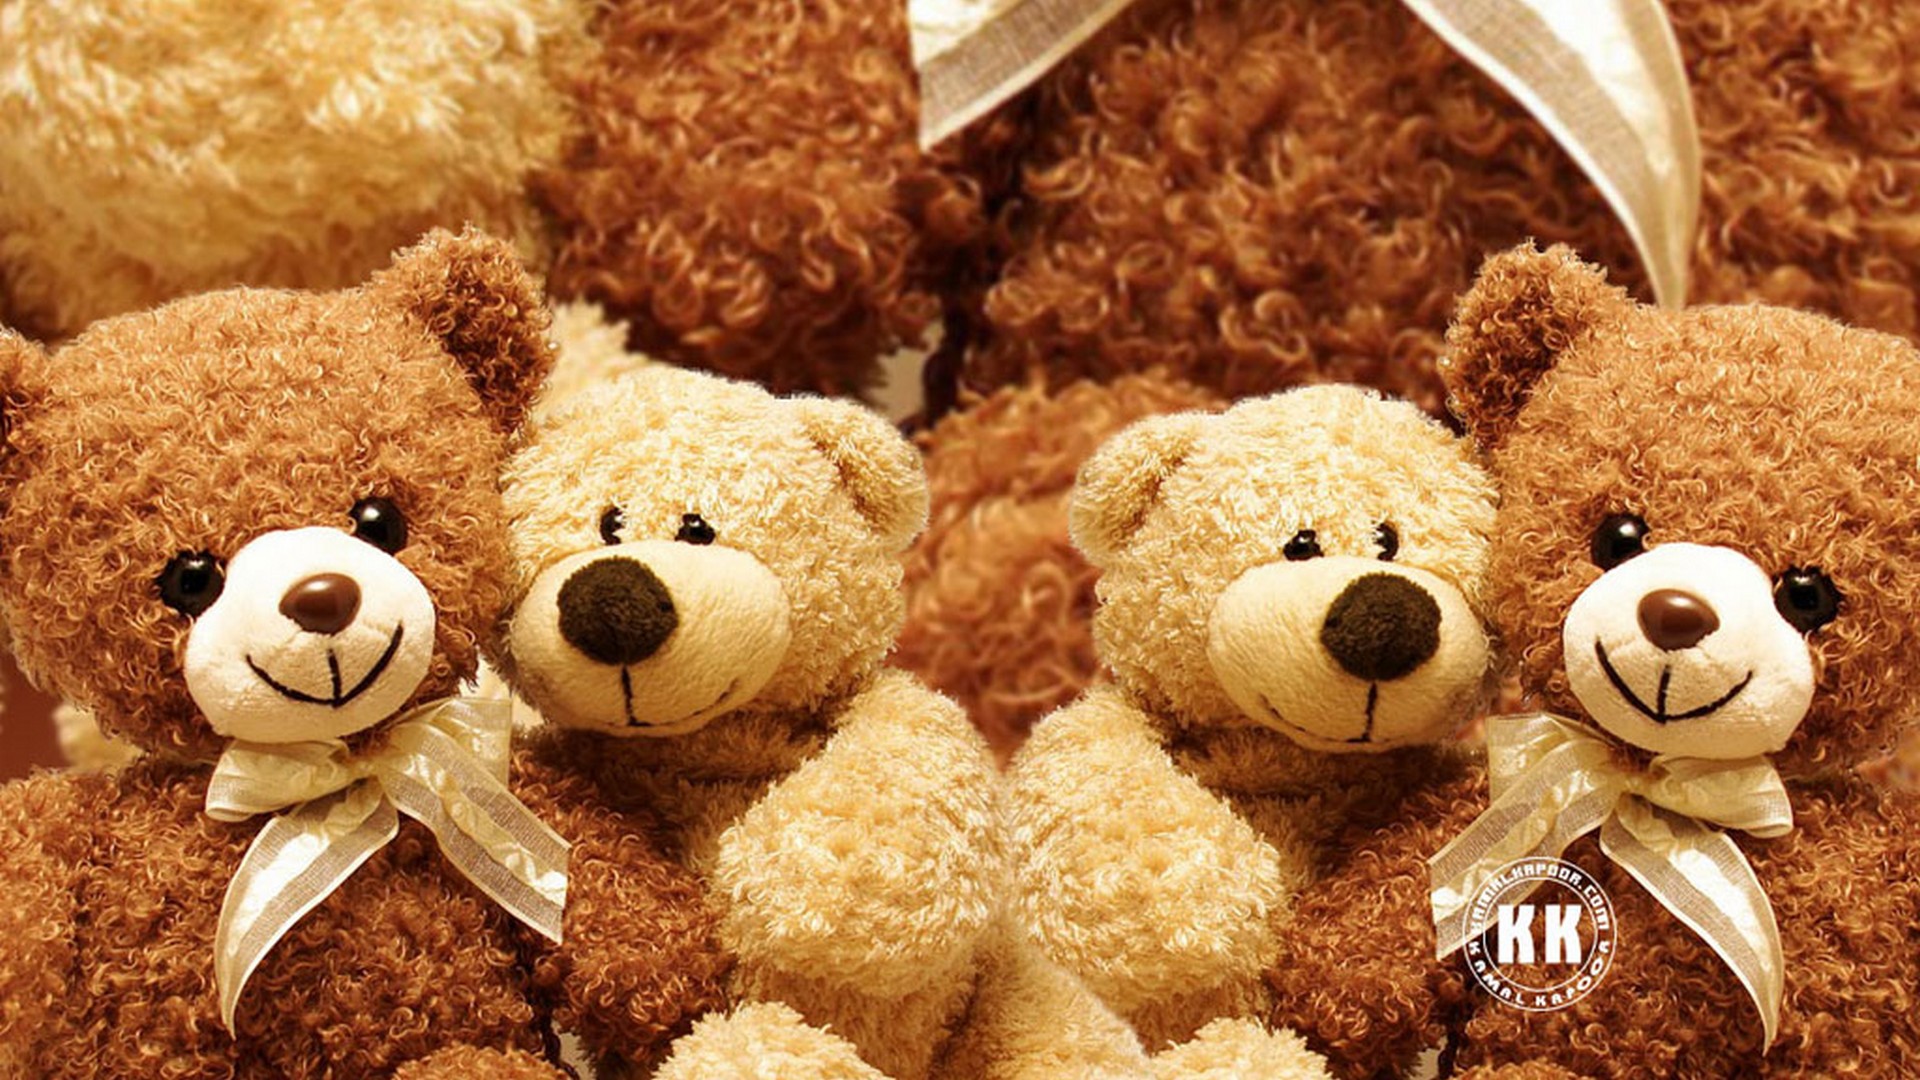 Wallpaper Teddy Bear Big HD With Resolution 1920X1080 pixel. You can make this wallpaper for your Desktop Computer Backgrounds, Mac Wallpapers, Android Lock screen or iPhone Screensavers